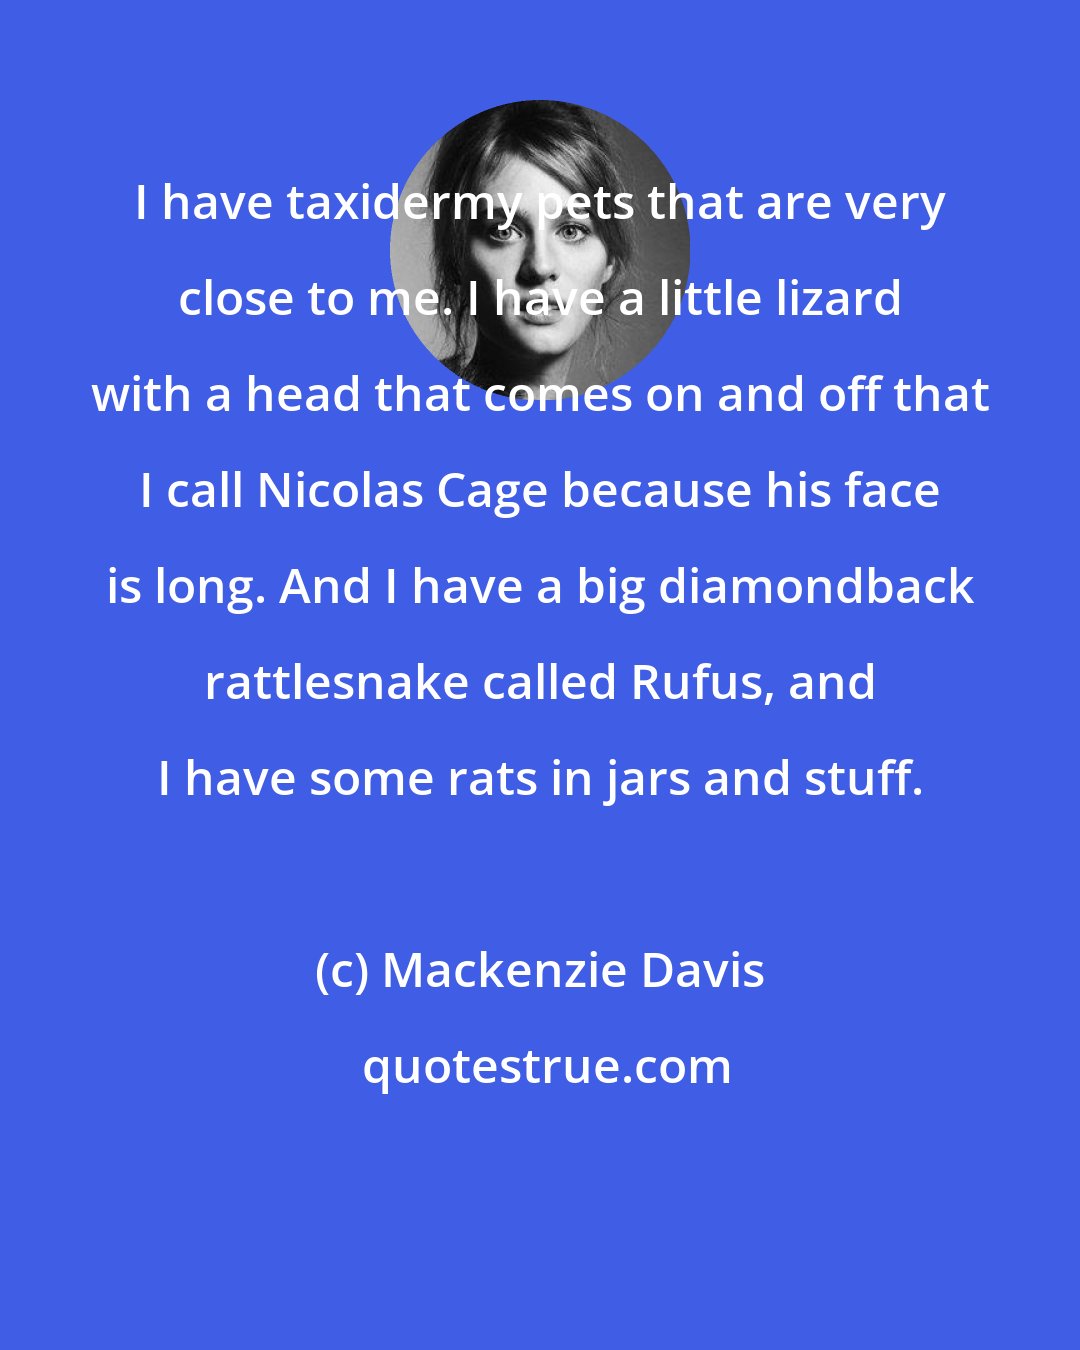 Mackenzie Davis: I have taxidermy pets that are very close to me. I have a little lizard with a head that comes on and off that I call Nicolas Cage because his face is long. And I have a big diamondback rattlesnake called Rufus, and I have some rats in jars and stuff.